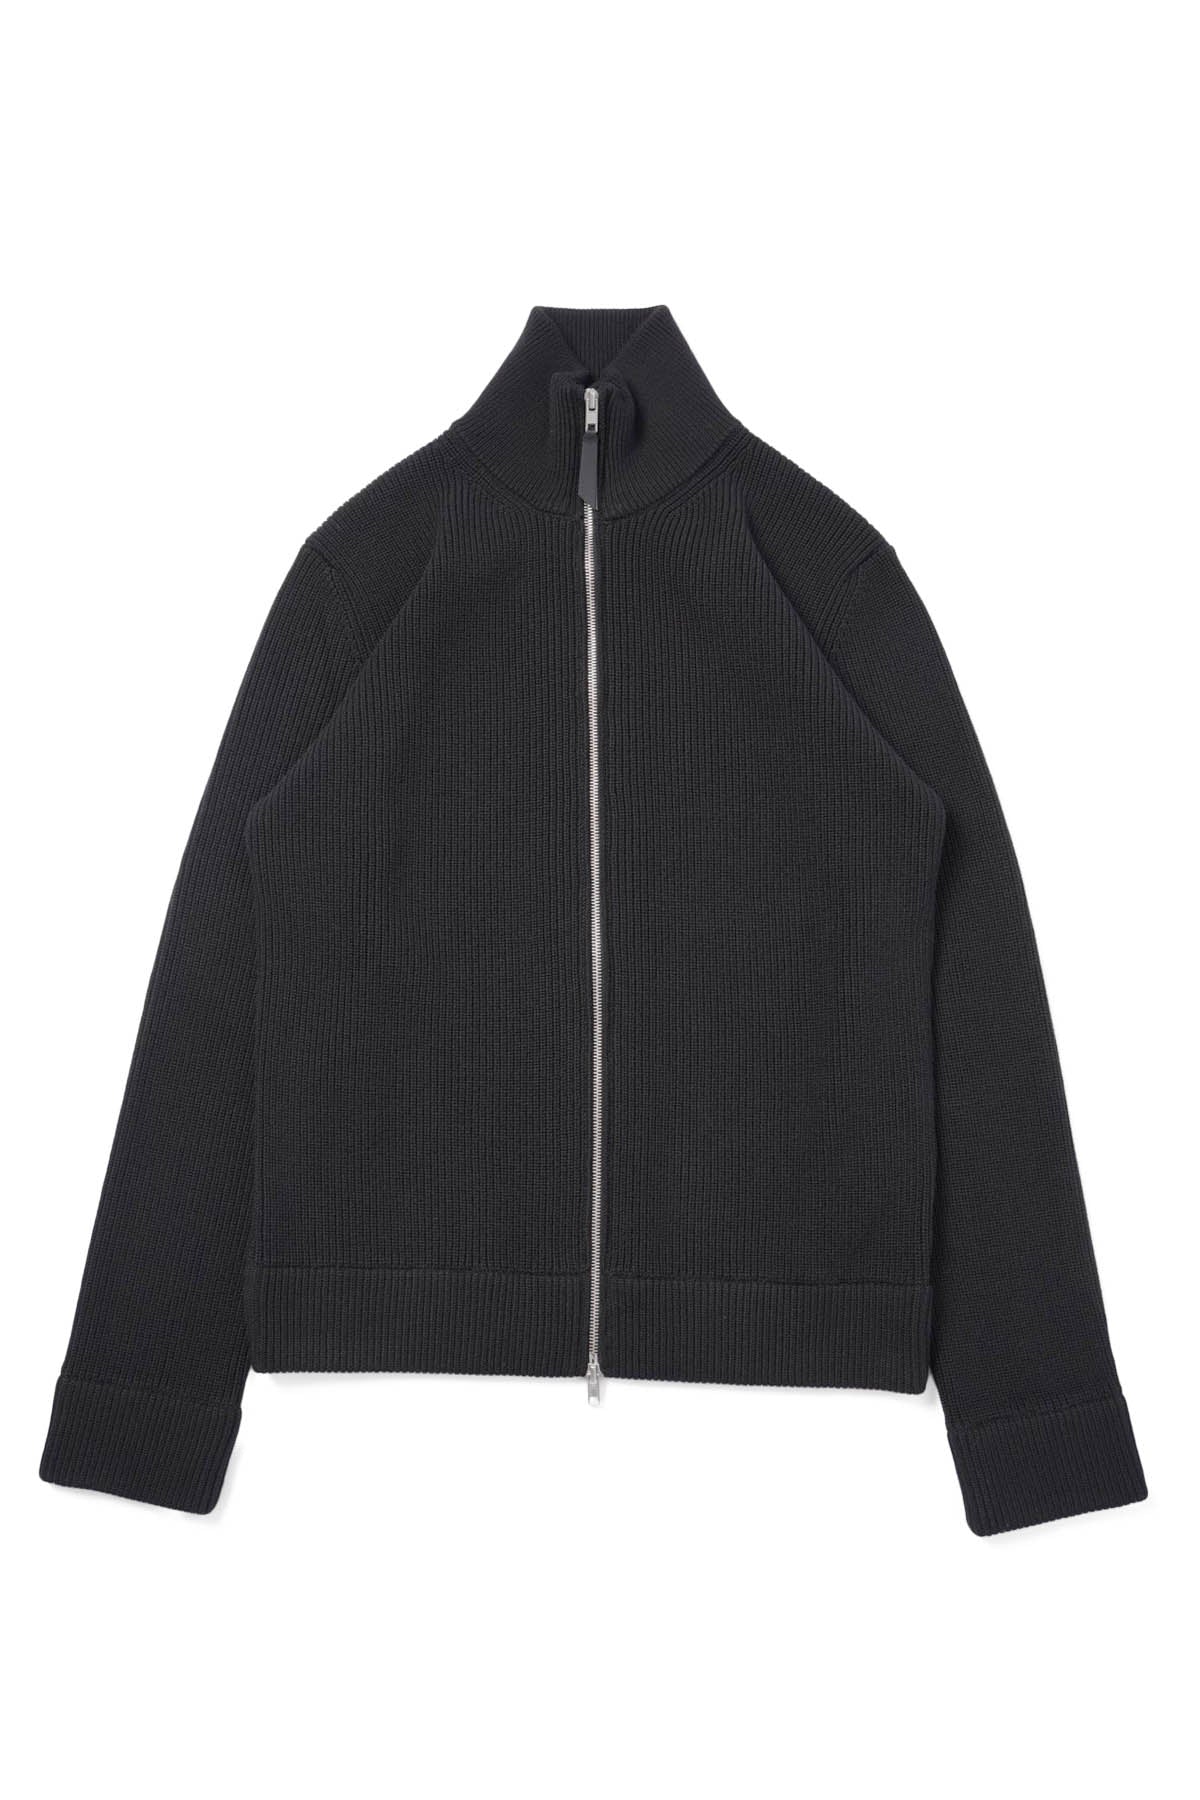 Driver's Zip Up Knit